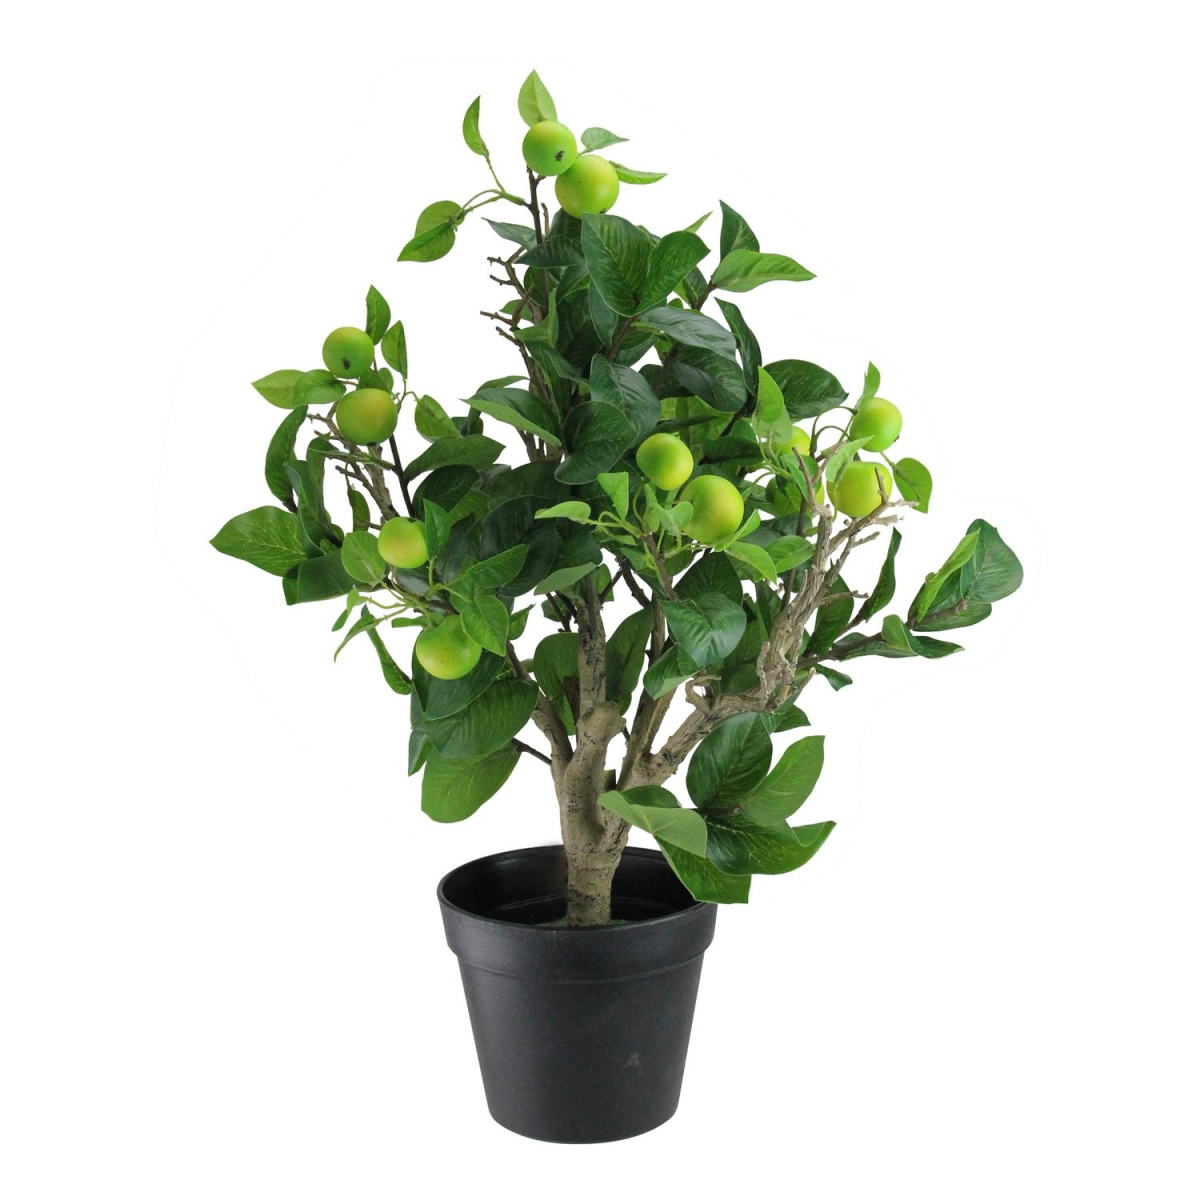 Picture of Northlight 32606359 23 in. Artificial Potted Bonsai - Style Decorative Green Apple Tree